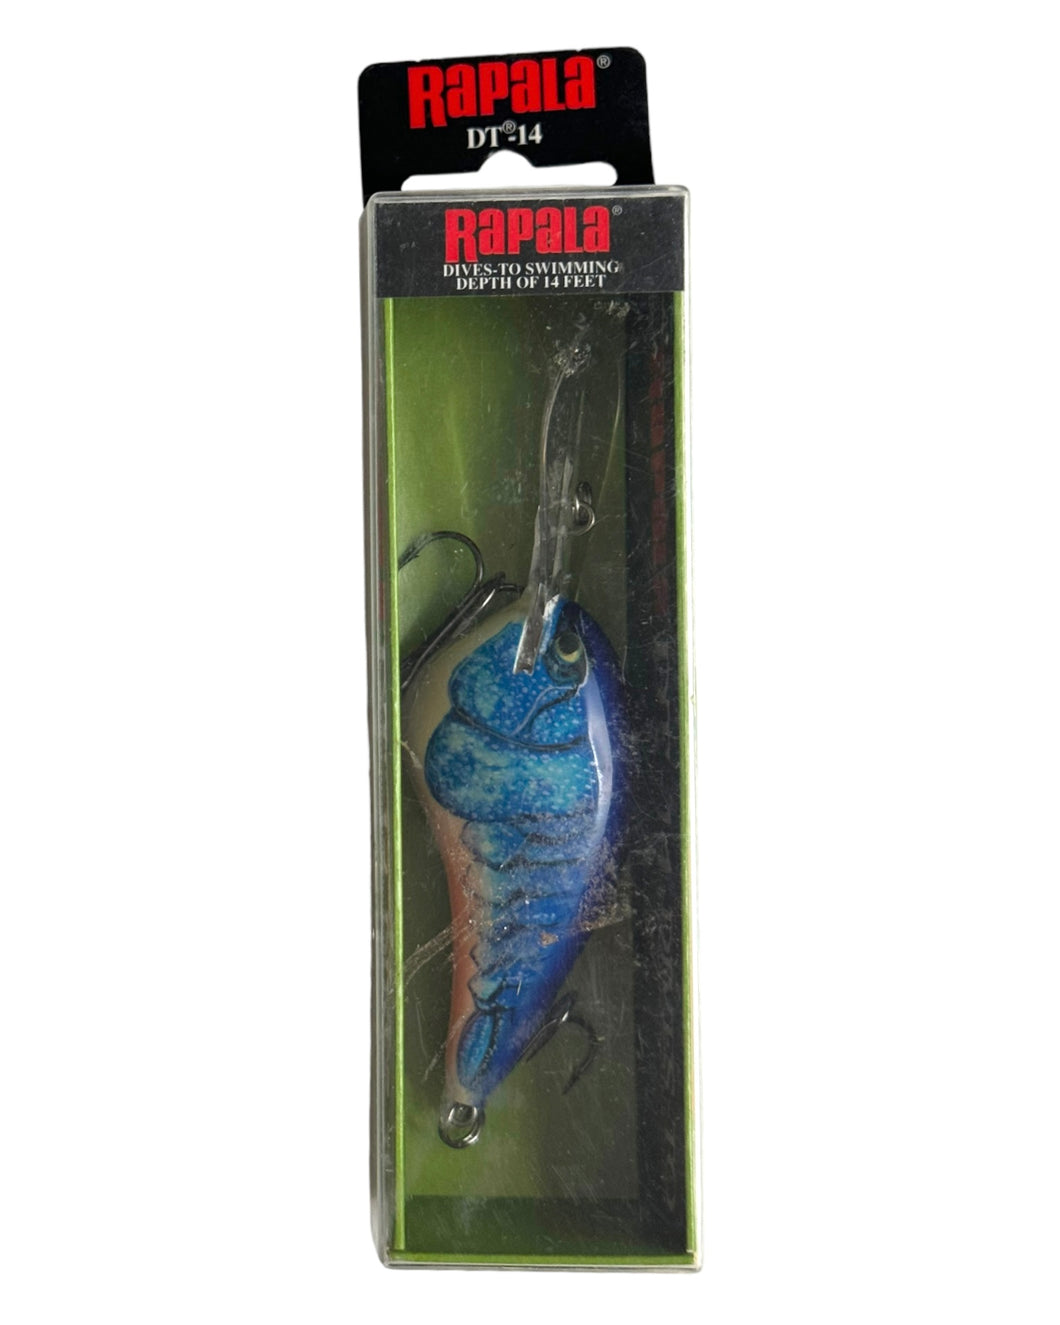 RAPALA LURES DT-14 Fishing Lure in MOLTING BLUE CRAW